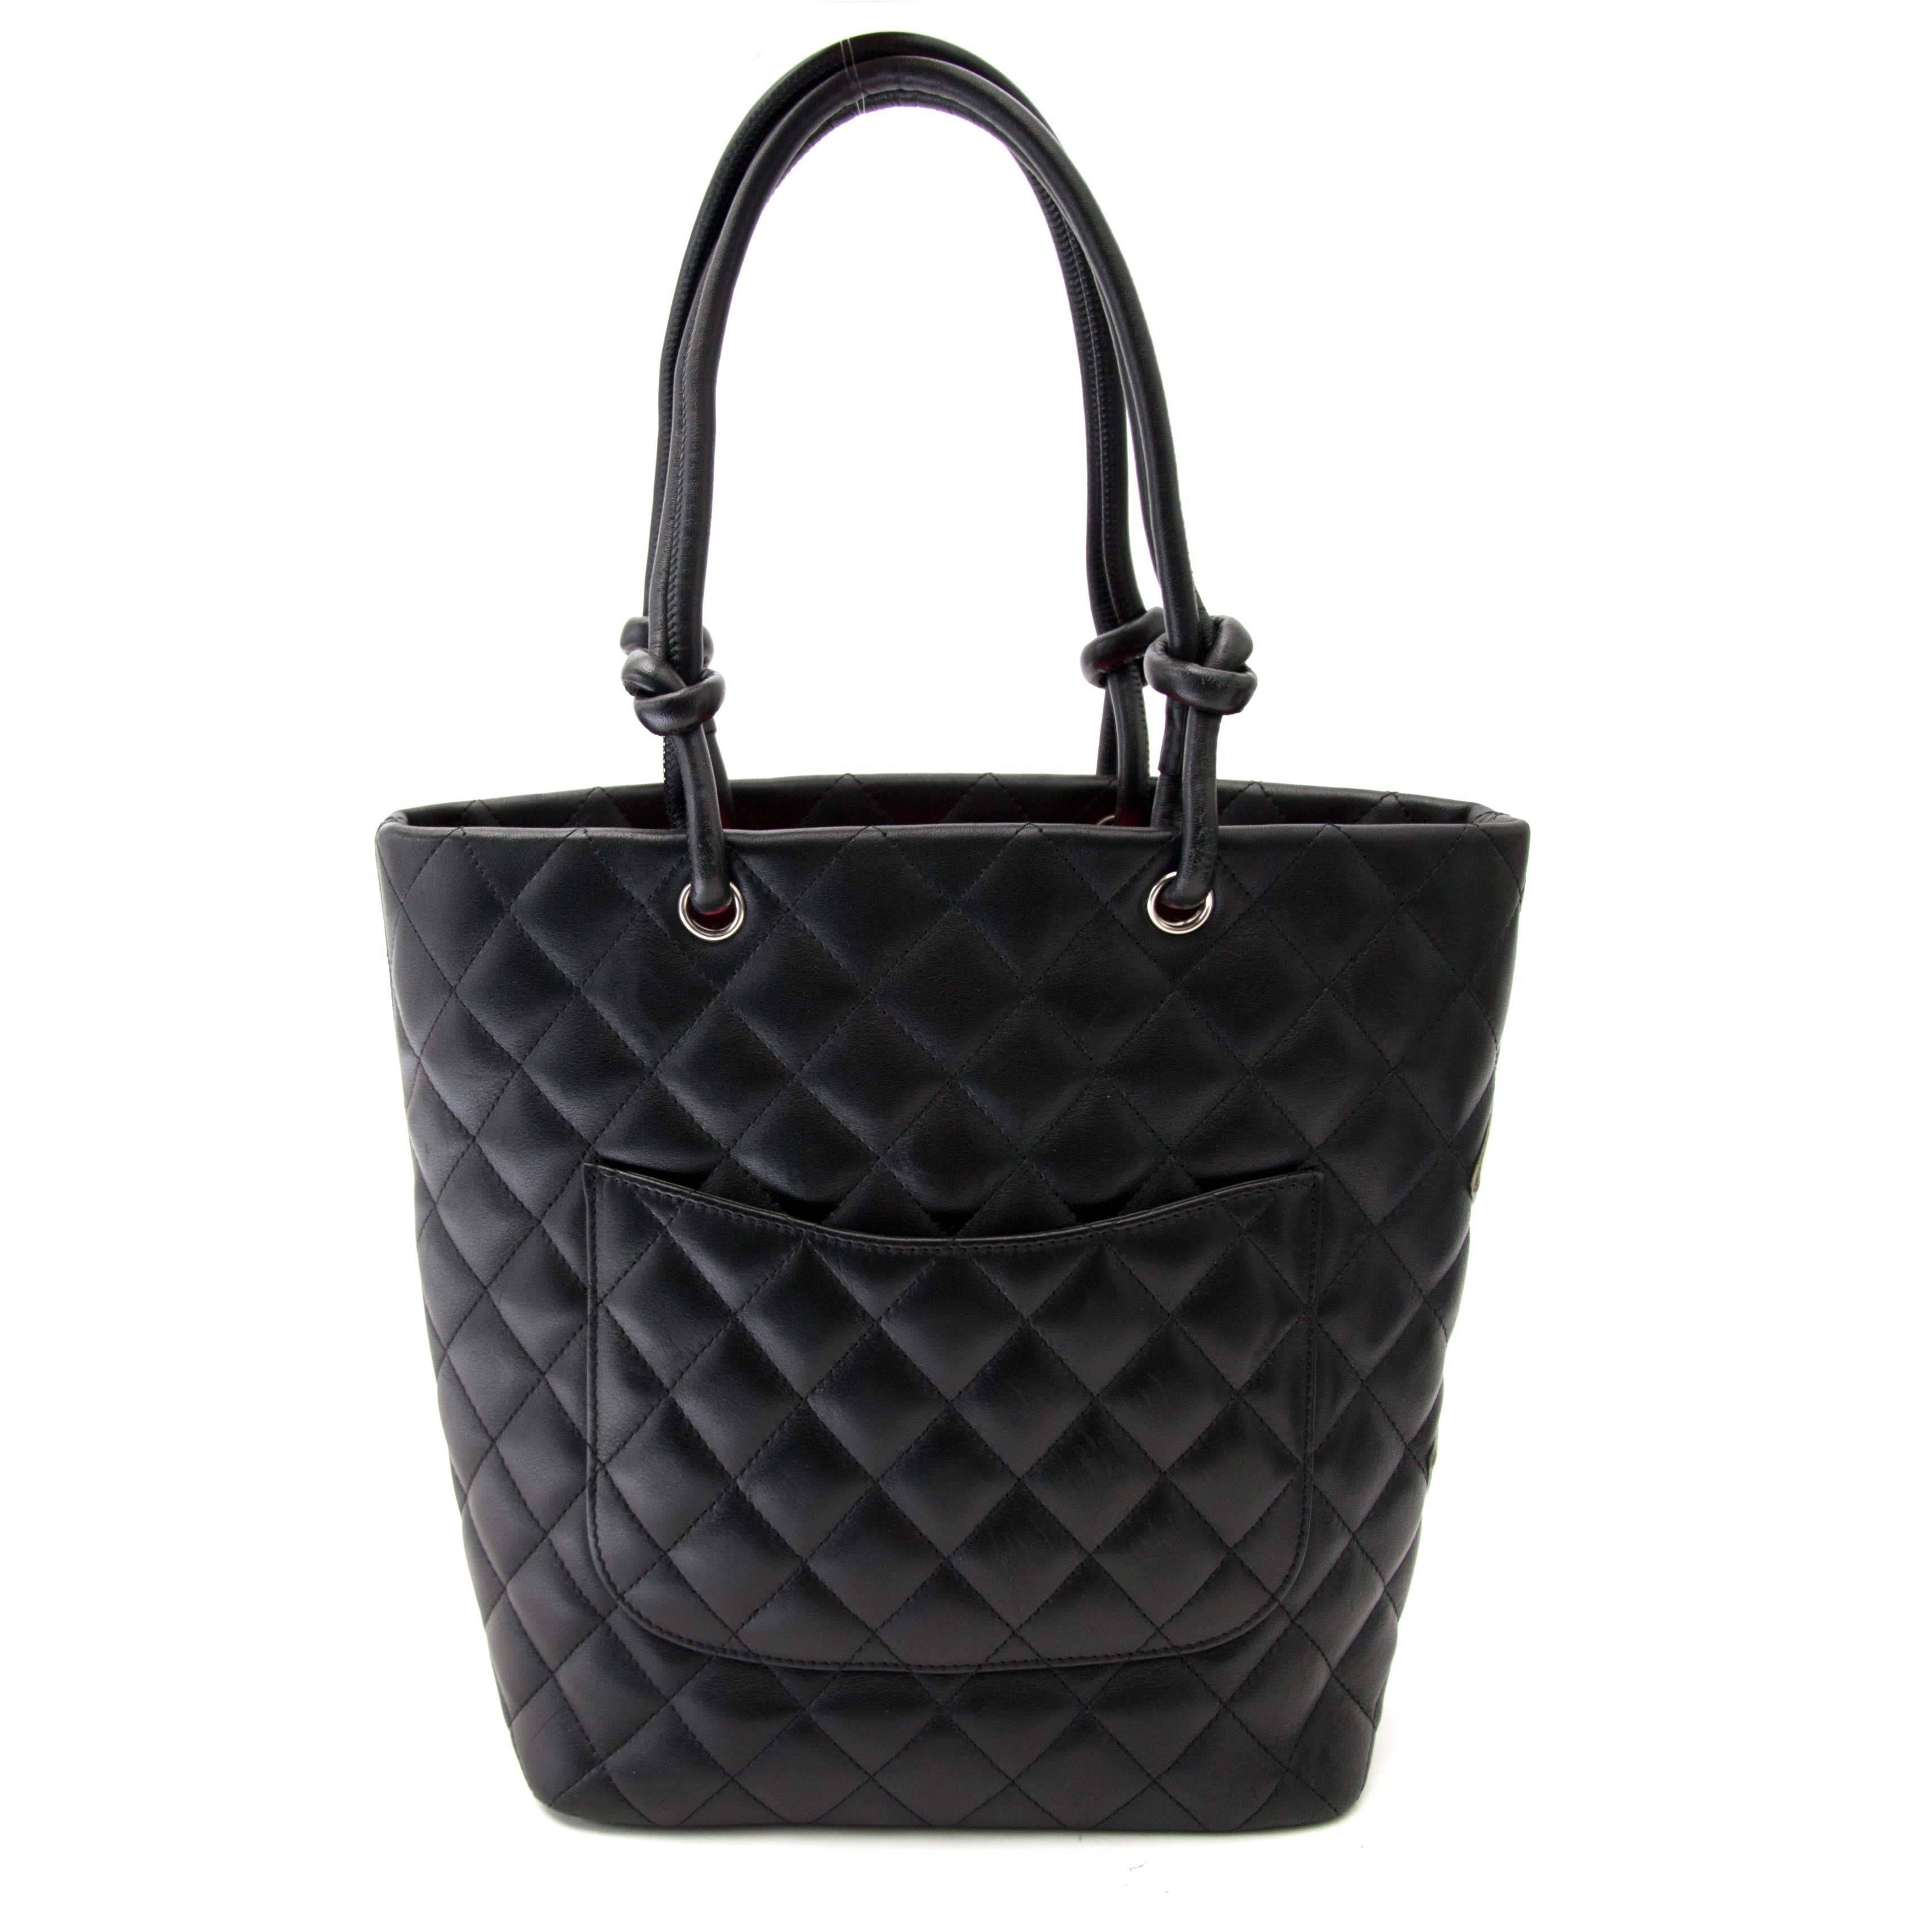 Excellent condition


 Chanel Cambon Quilted Black And White Small Tote

This fabulous Chanel tote is made out of black soft leahter with a vivid fuschia jacquard interior lining.
The double handles in black leather allowing the bag to be worn in